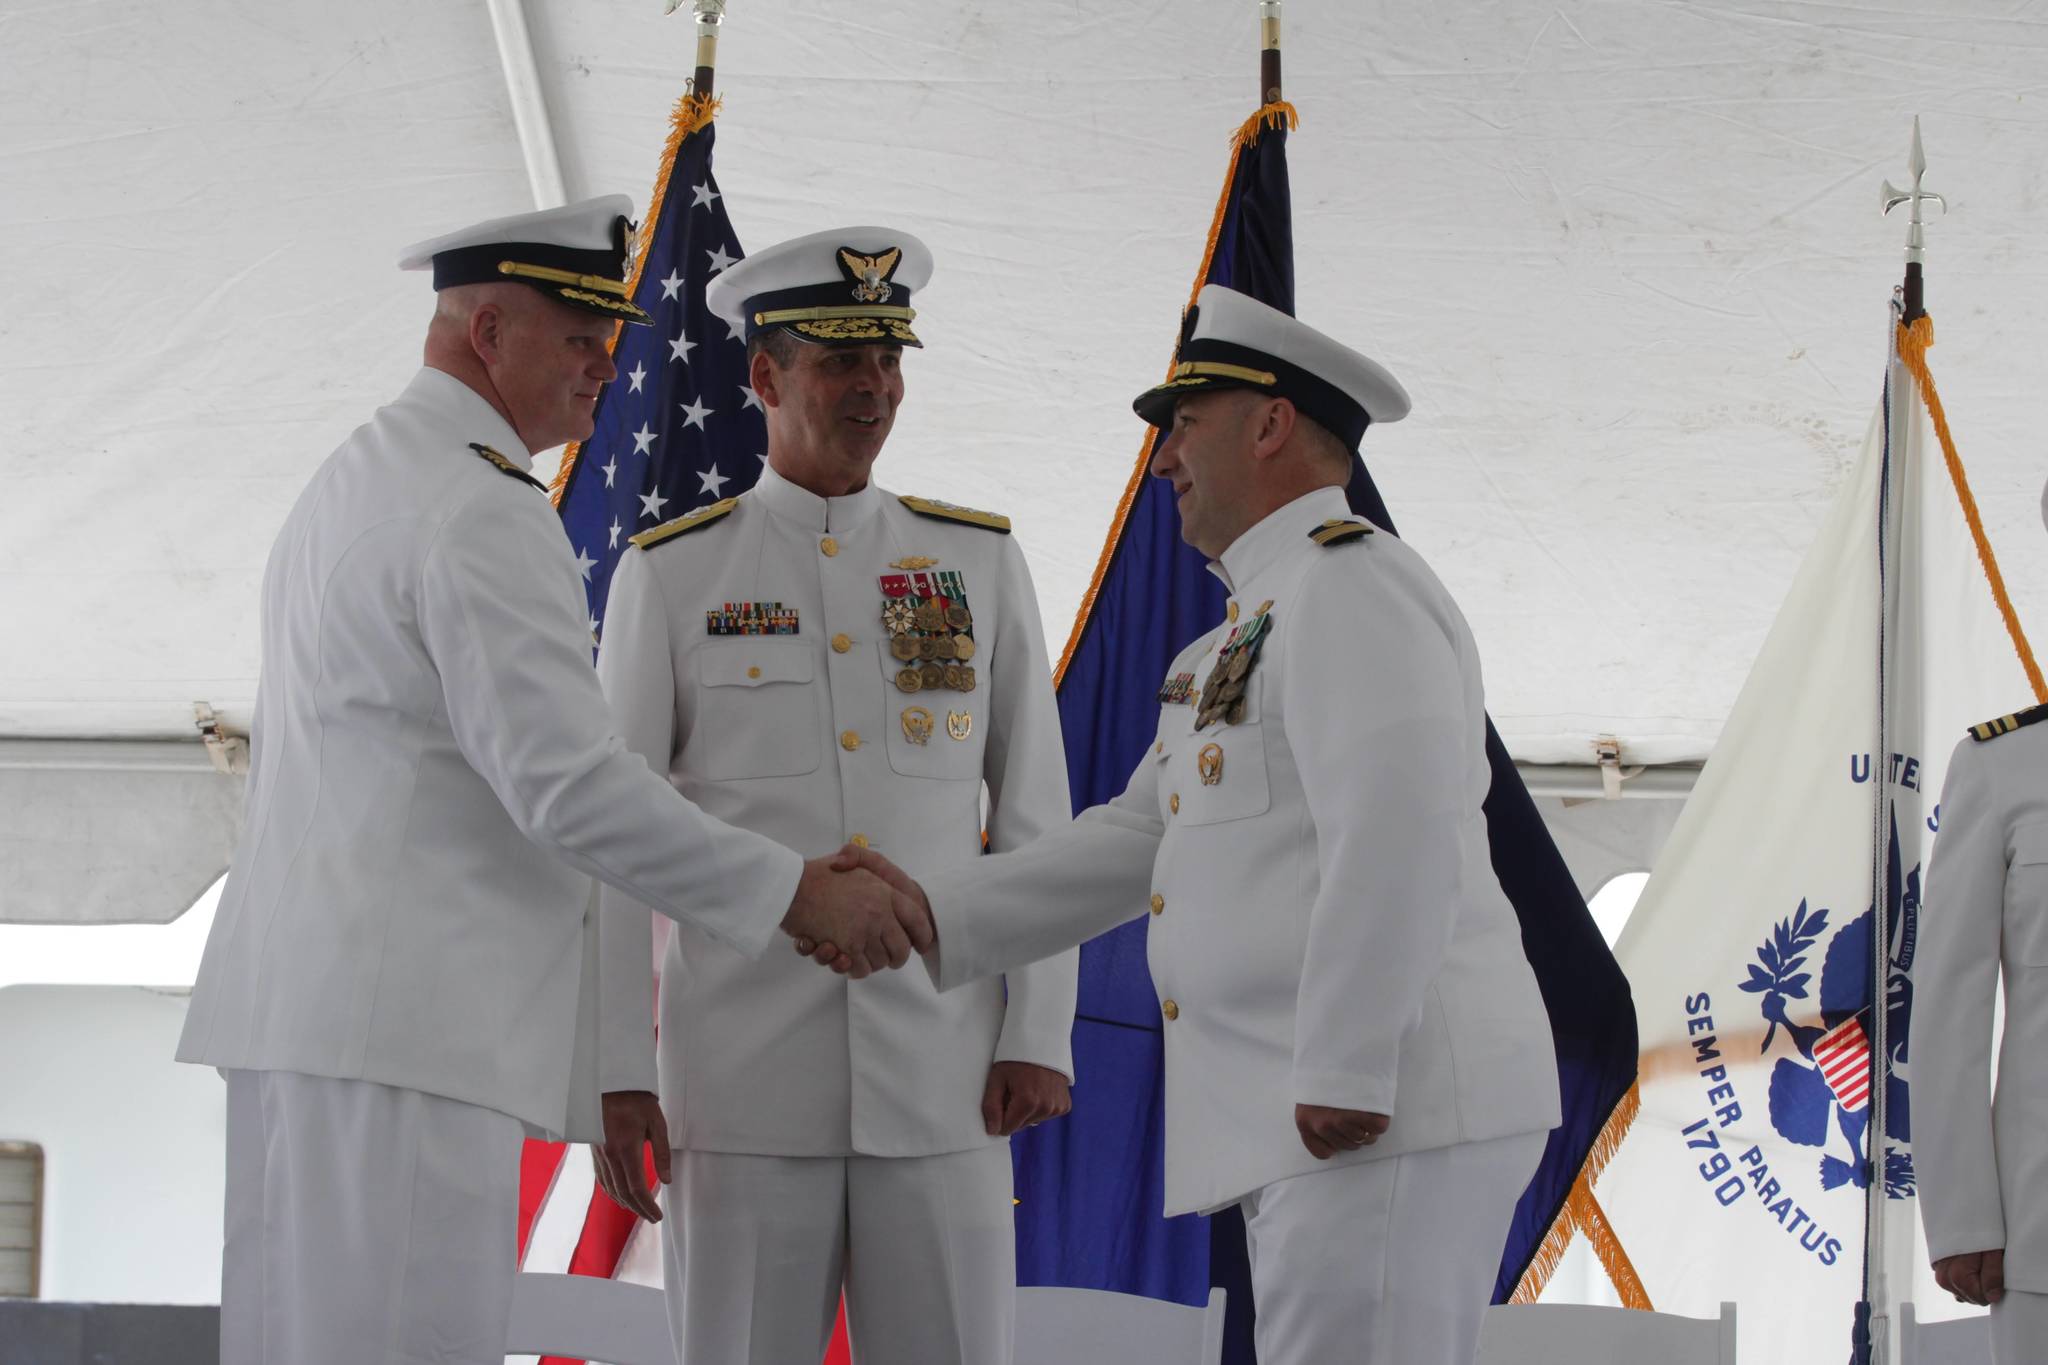 Capt. Darwin R. Jensen, left, takes command of Coast Guard Sector Juneau from Capt. Stephen J. White, right, in a change of command ceremony at the station on July 7, 2021. (Michael S. Lockett / Juneau Empire)